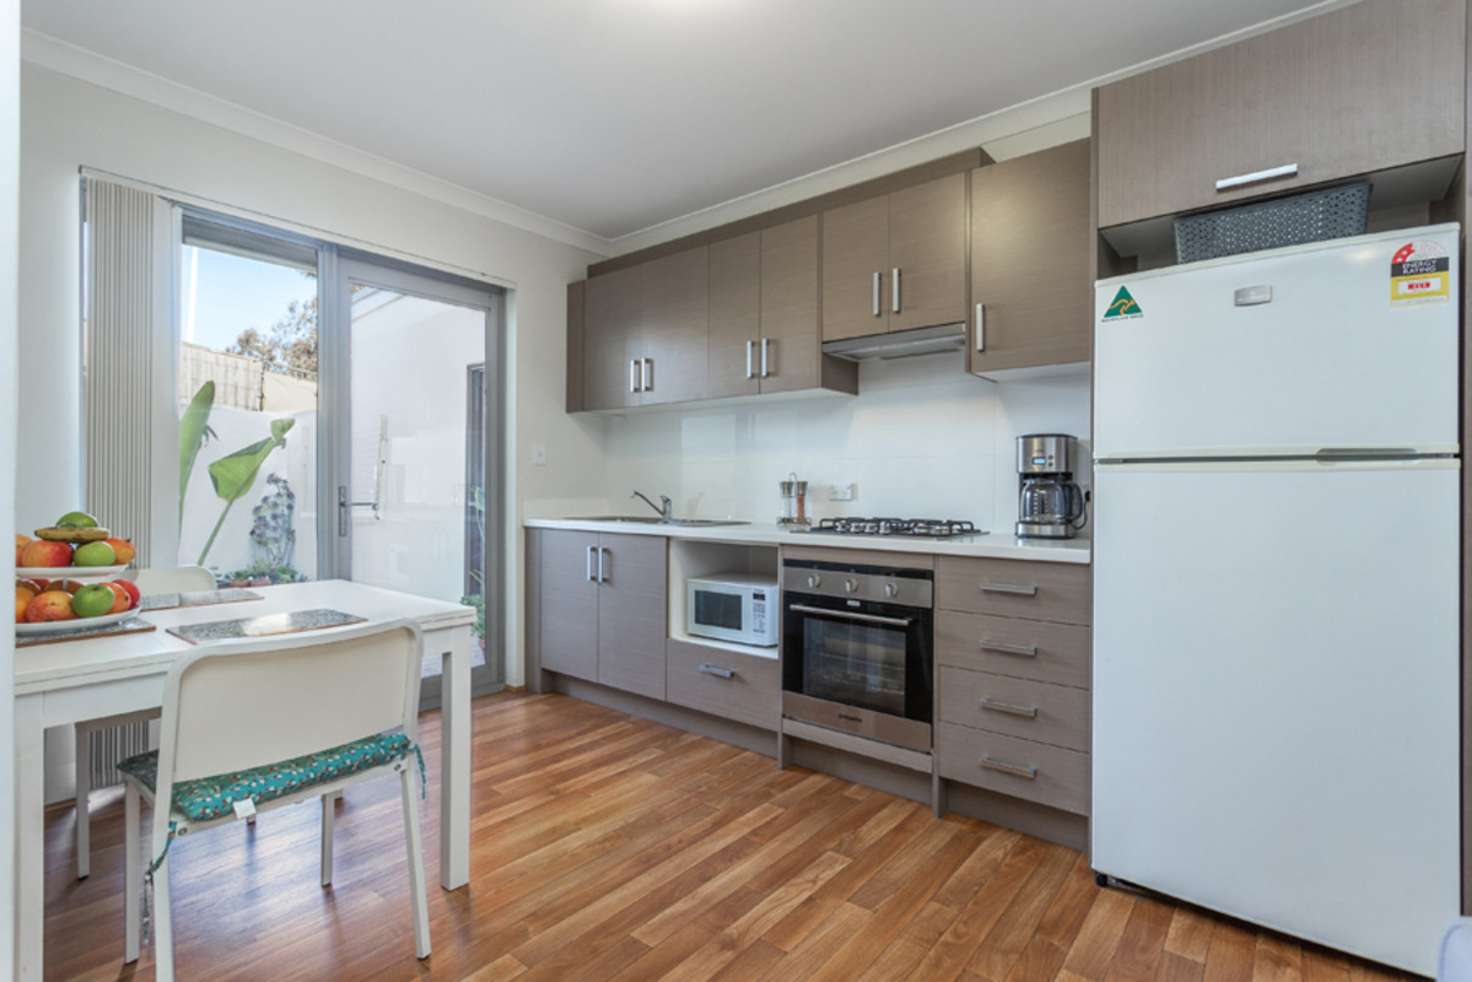 Main view of Homely apartment listing, 4/125 Lawley Street, Tuart Hill WA 6060